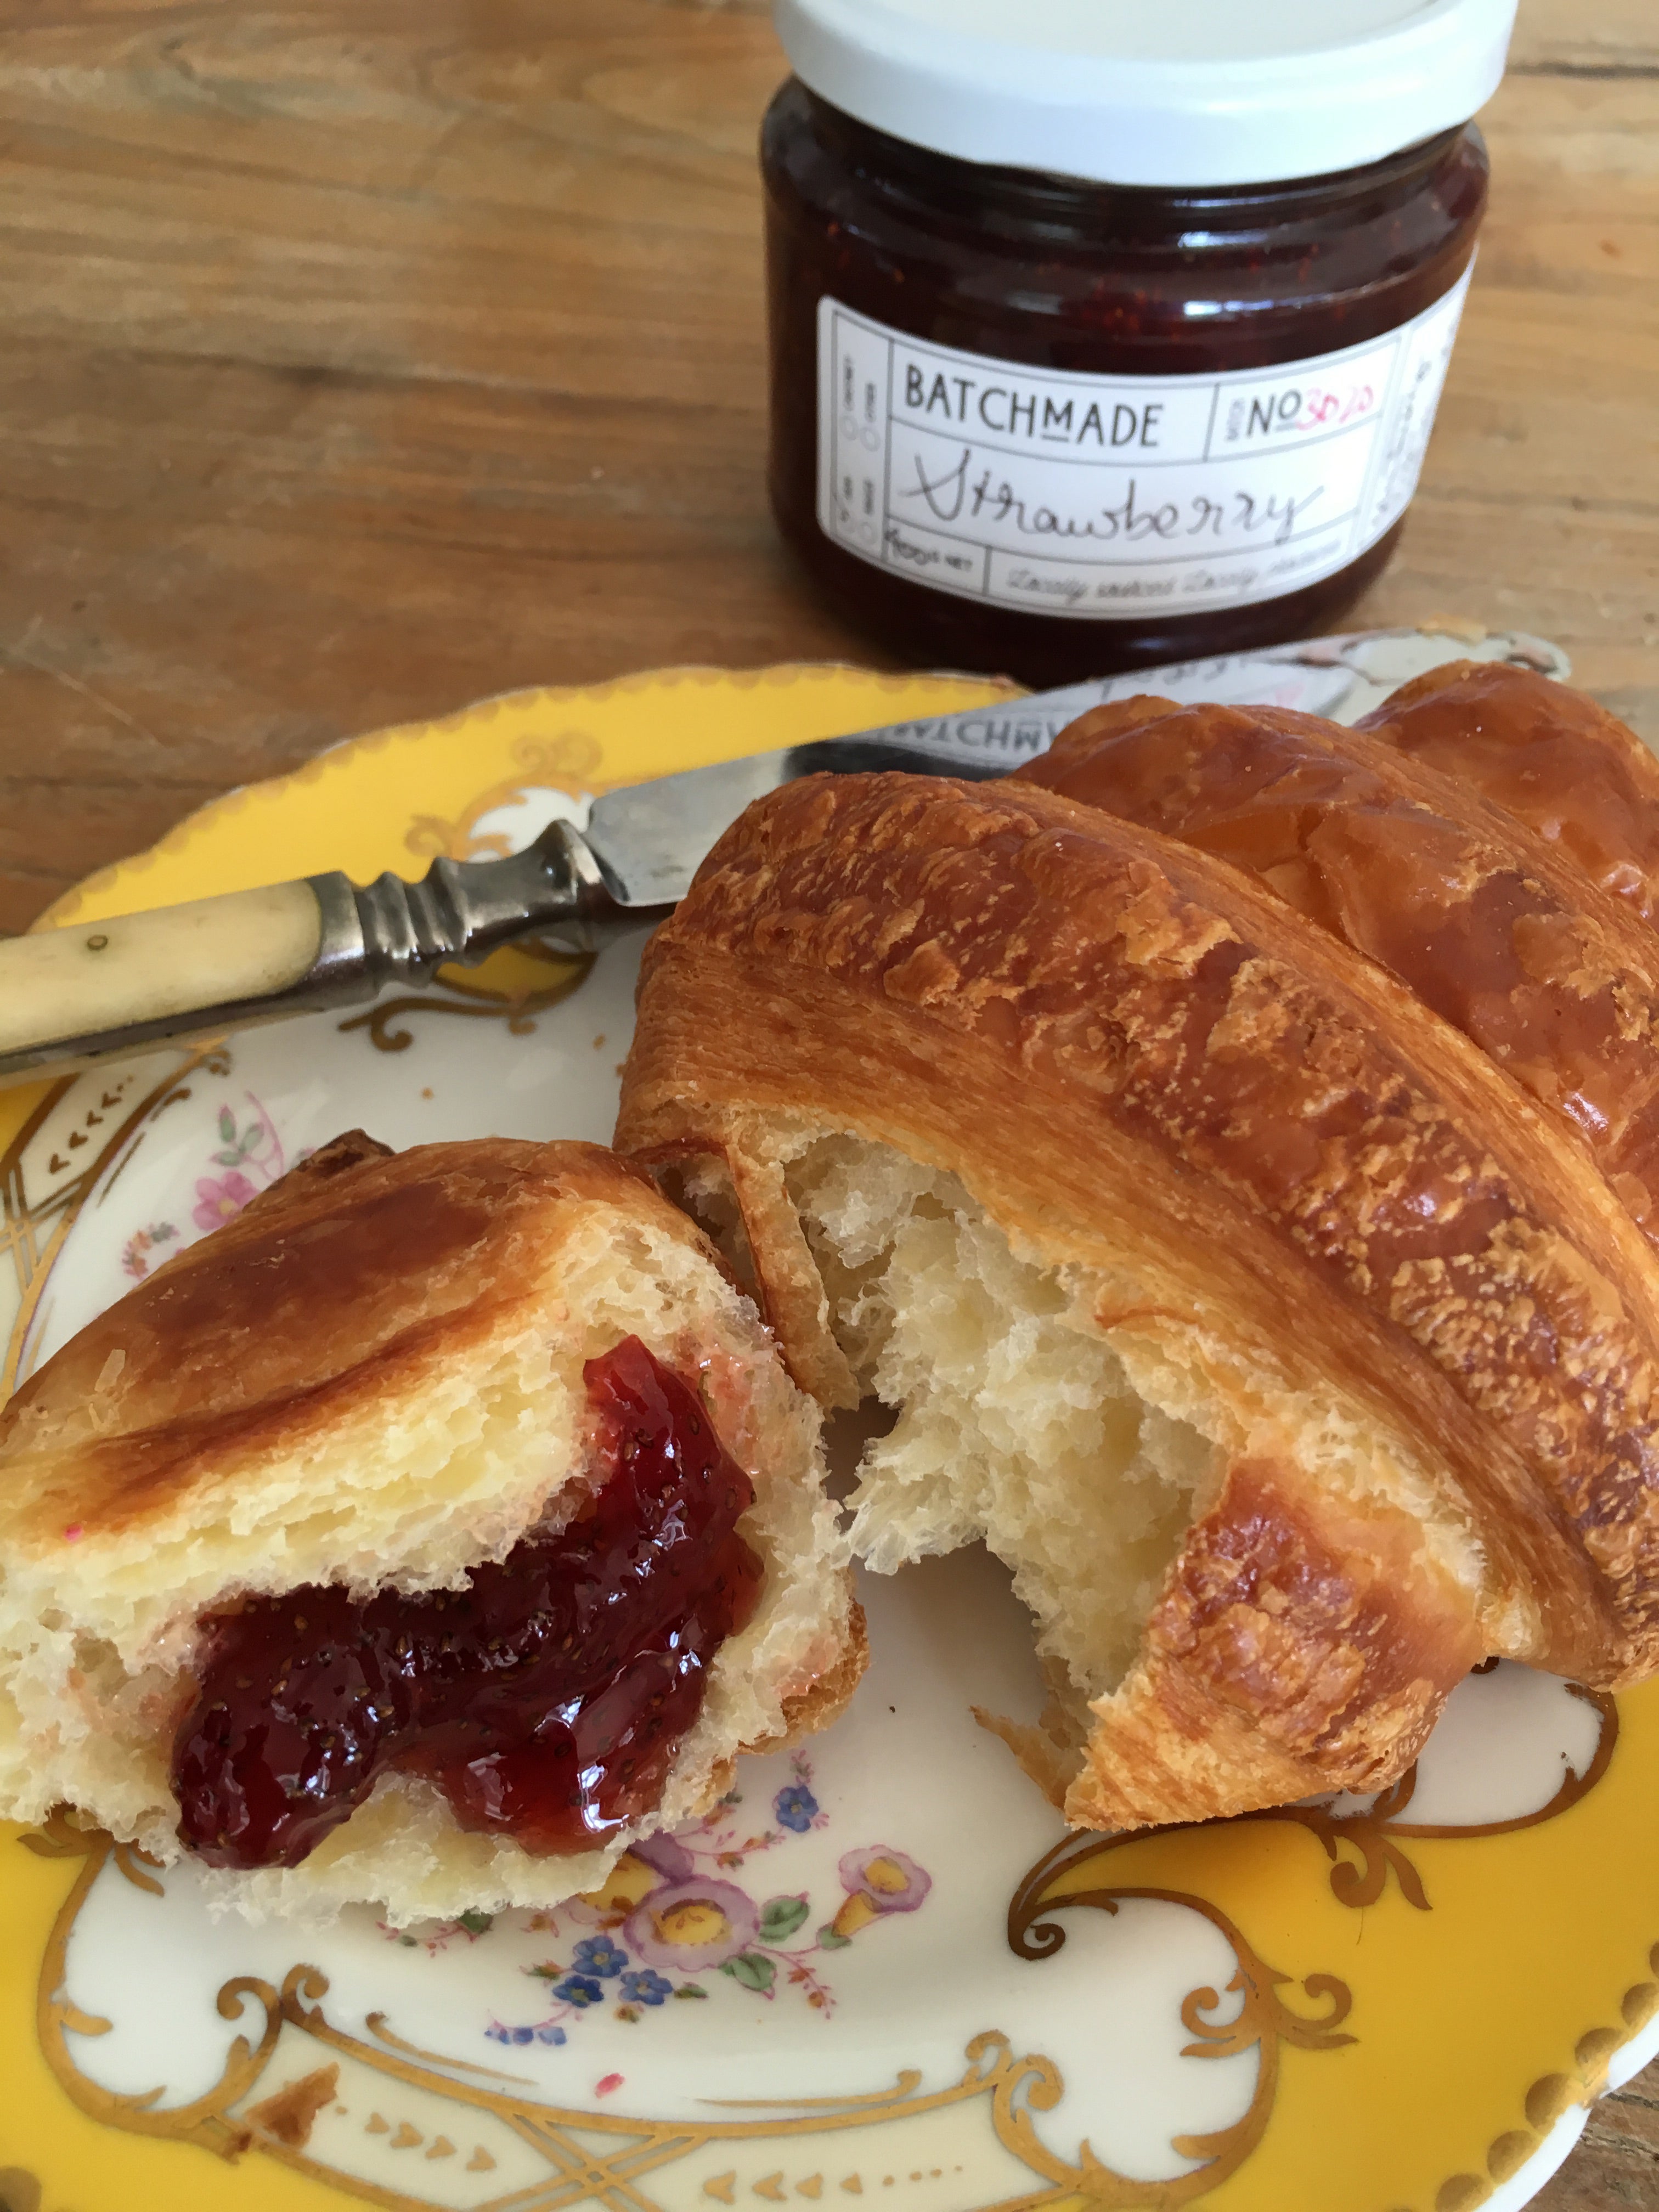 Strawberry jam with croissant